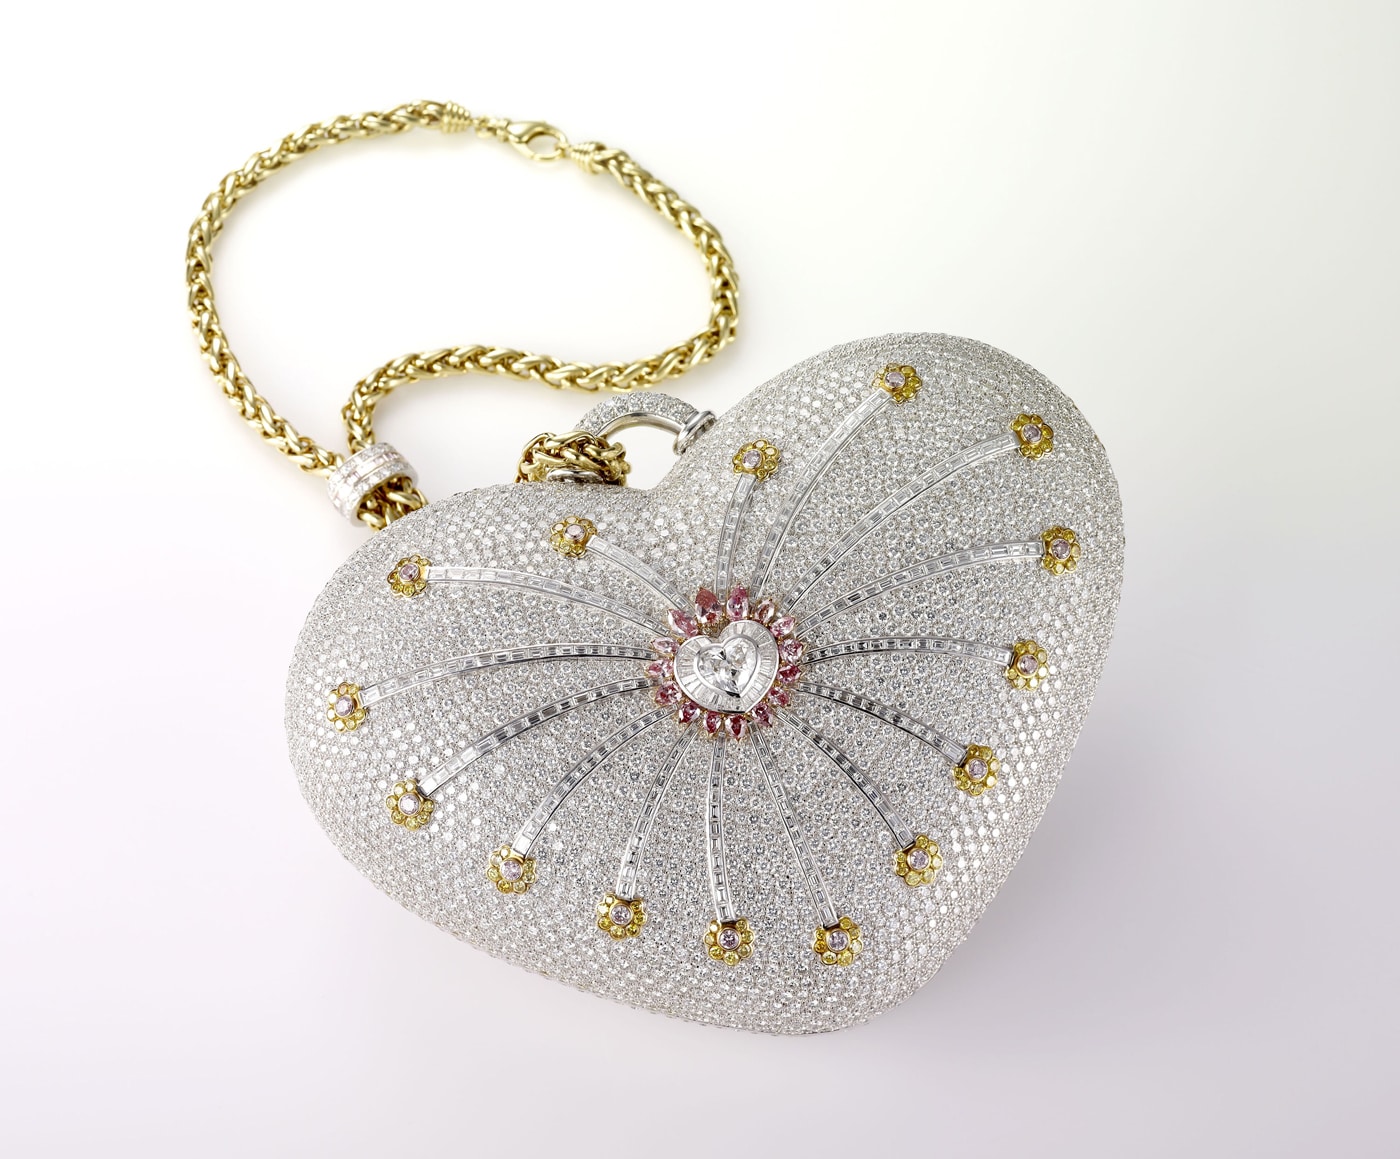 World’s Most Expensive Handbag (It’s Not Even That Cute)